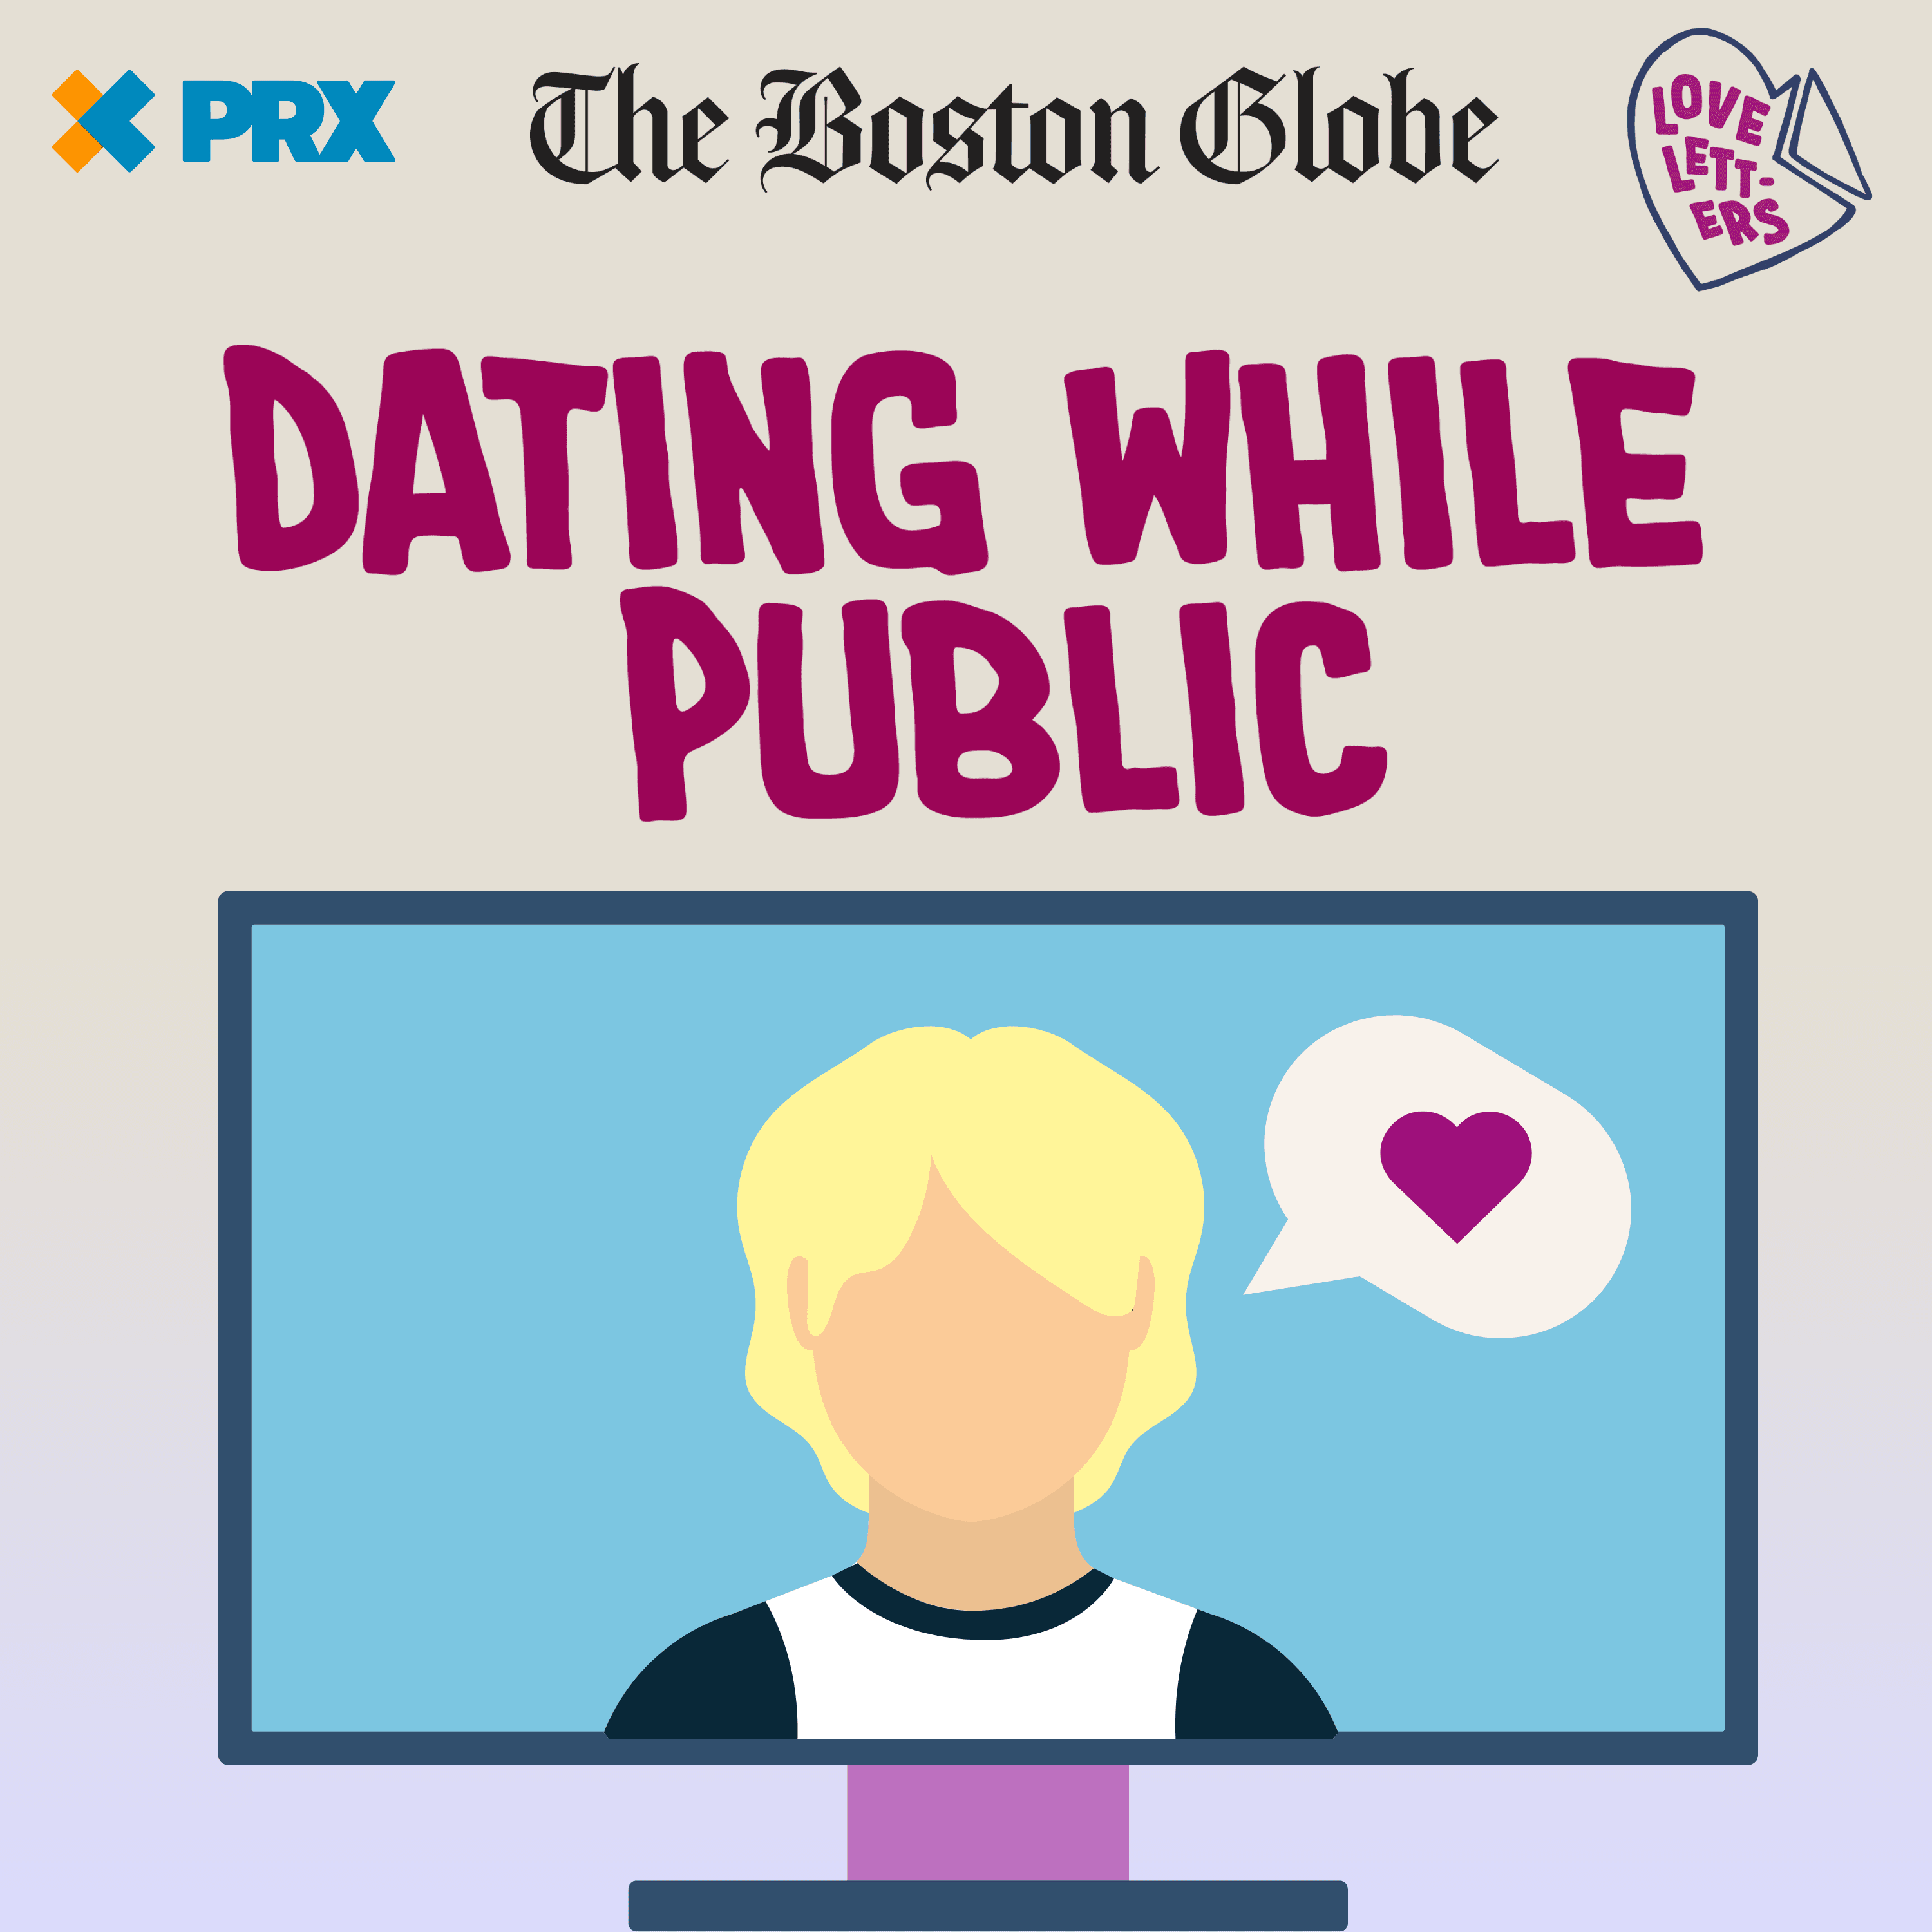 Thumbnail for "S9E10: Dating While Public".